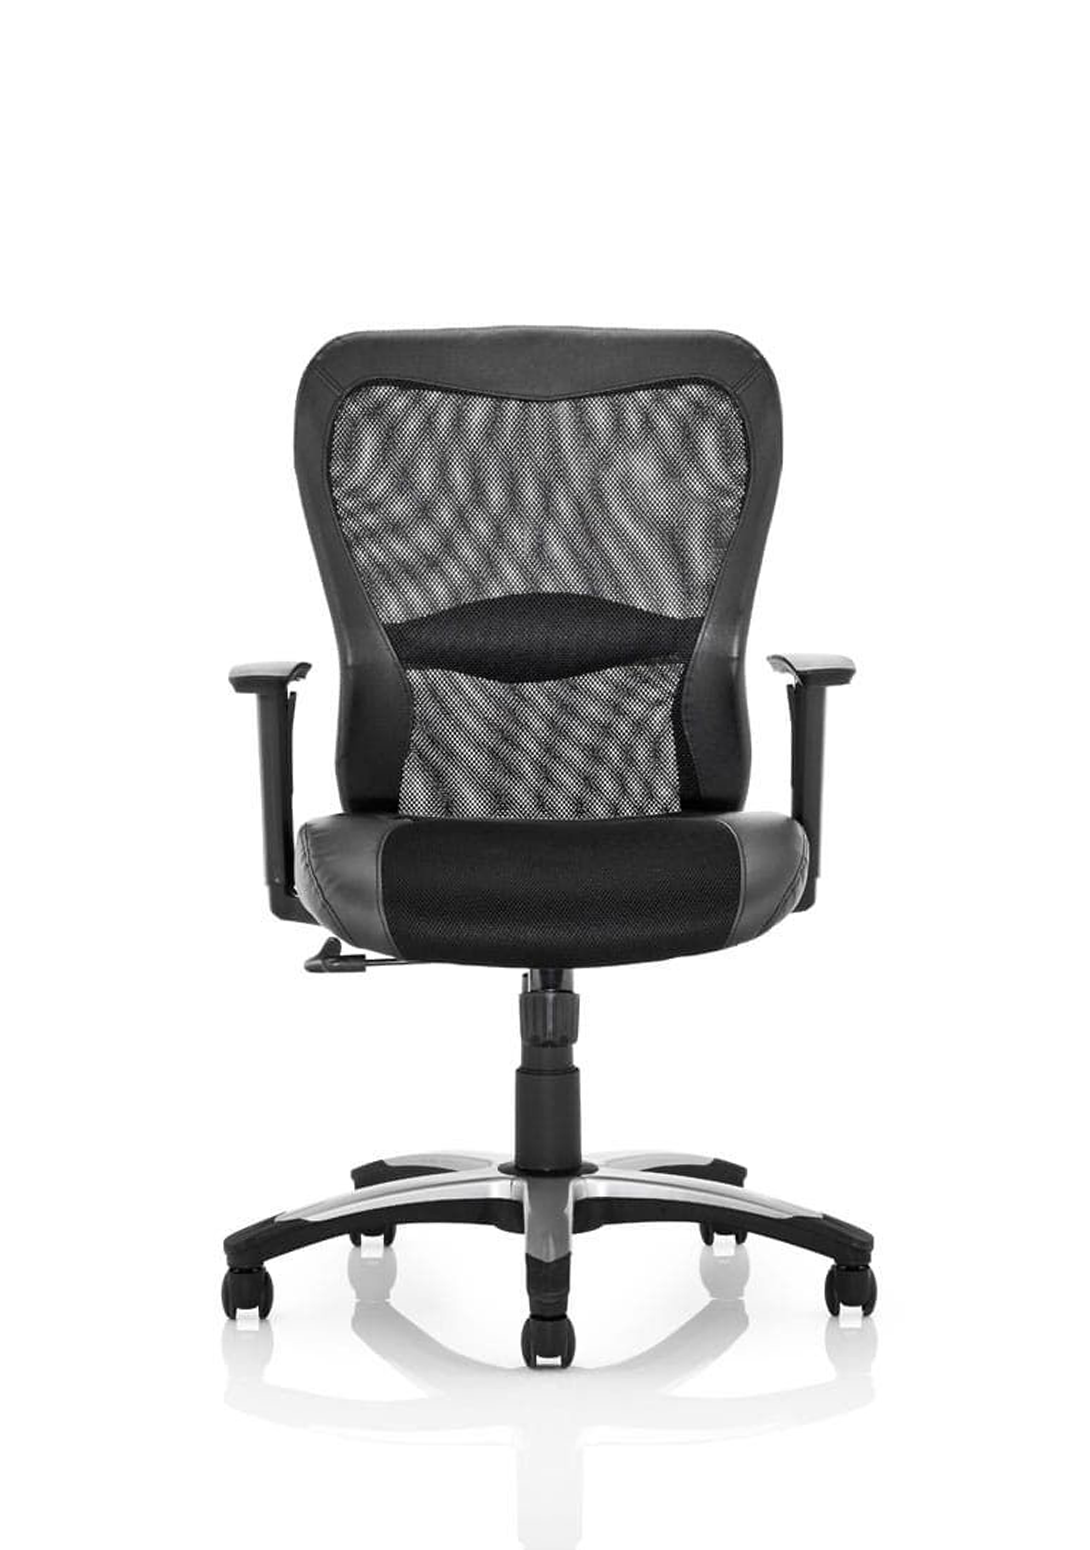 Victor II Exec Home Office Chair | Executive Chair | Home Office Furniture | Leather and Mesh Chair | Chrome detail | Swivel Chair | Swivel Chair with mesh